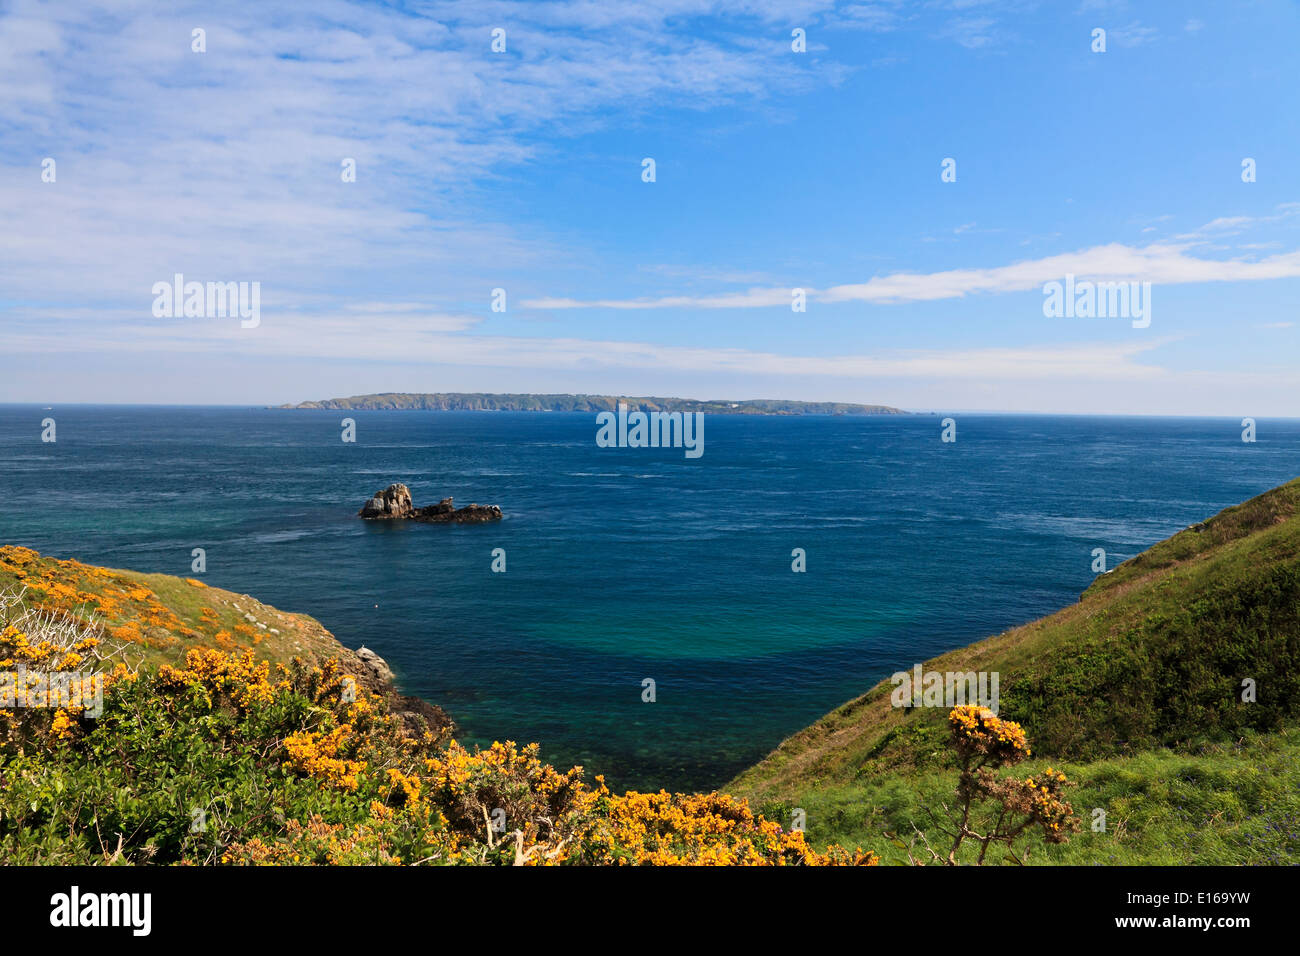 9221. View to Sark, Herm, Channel Islands, UK, Europe Stock Photo